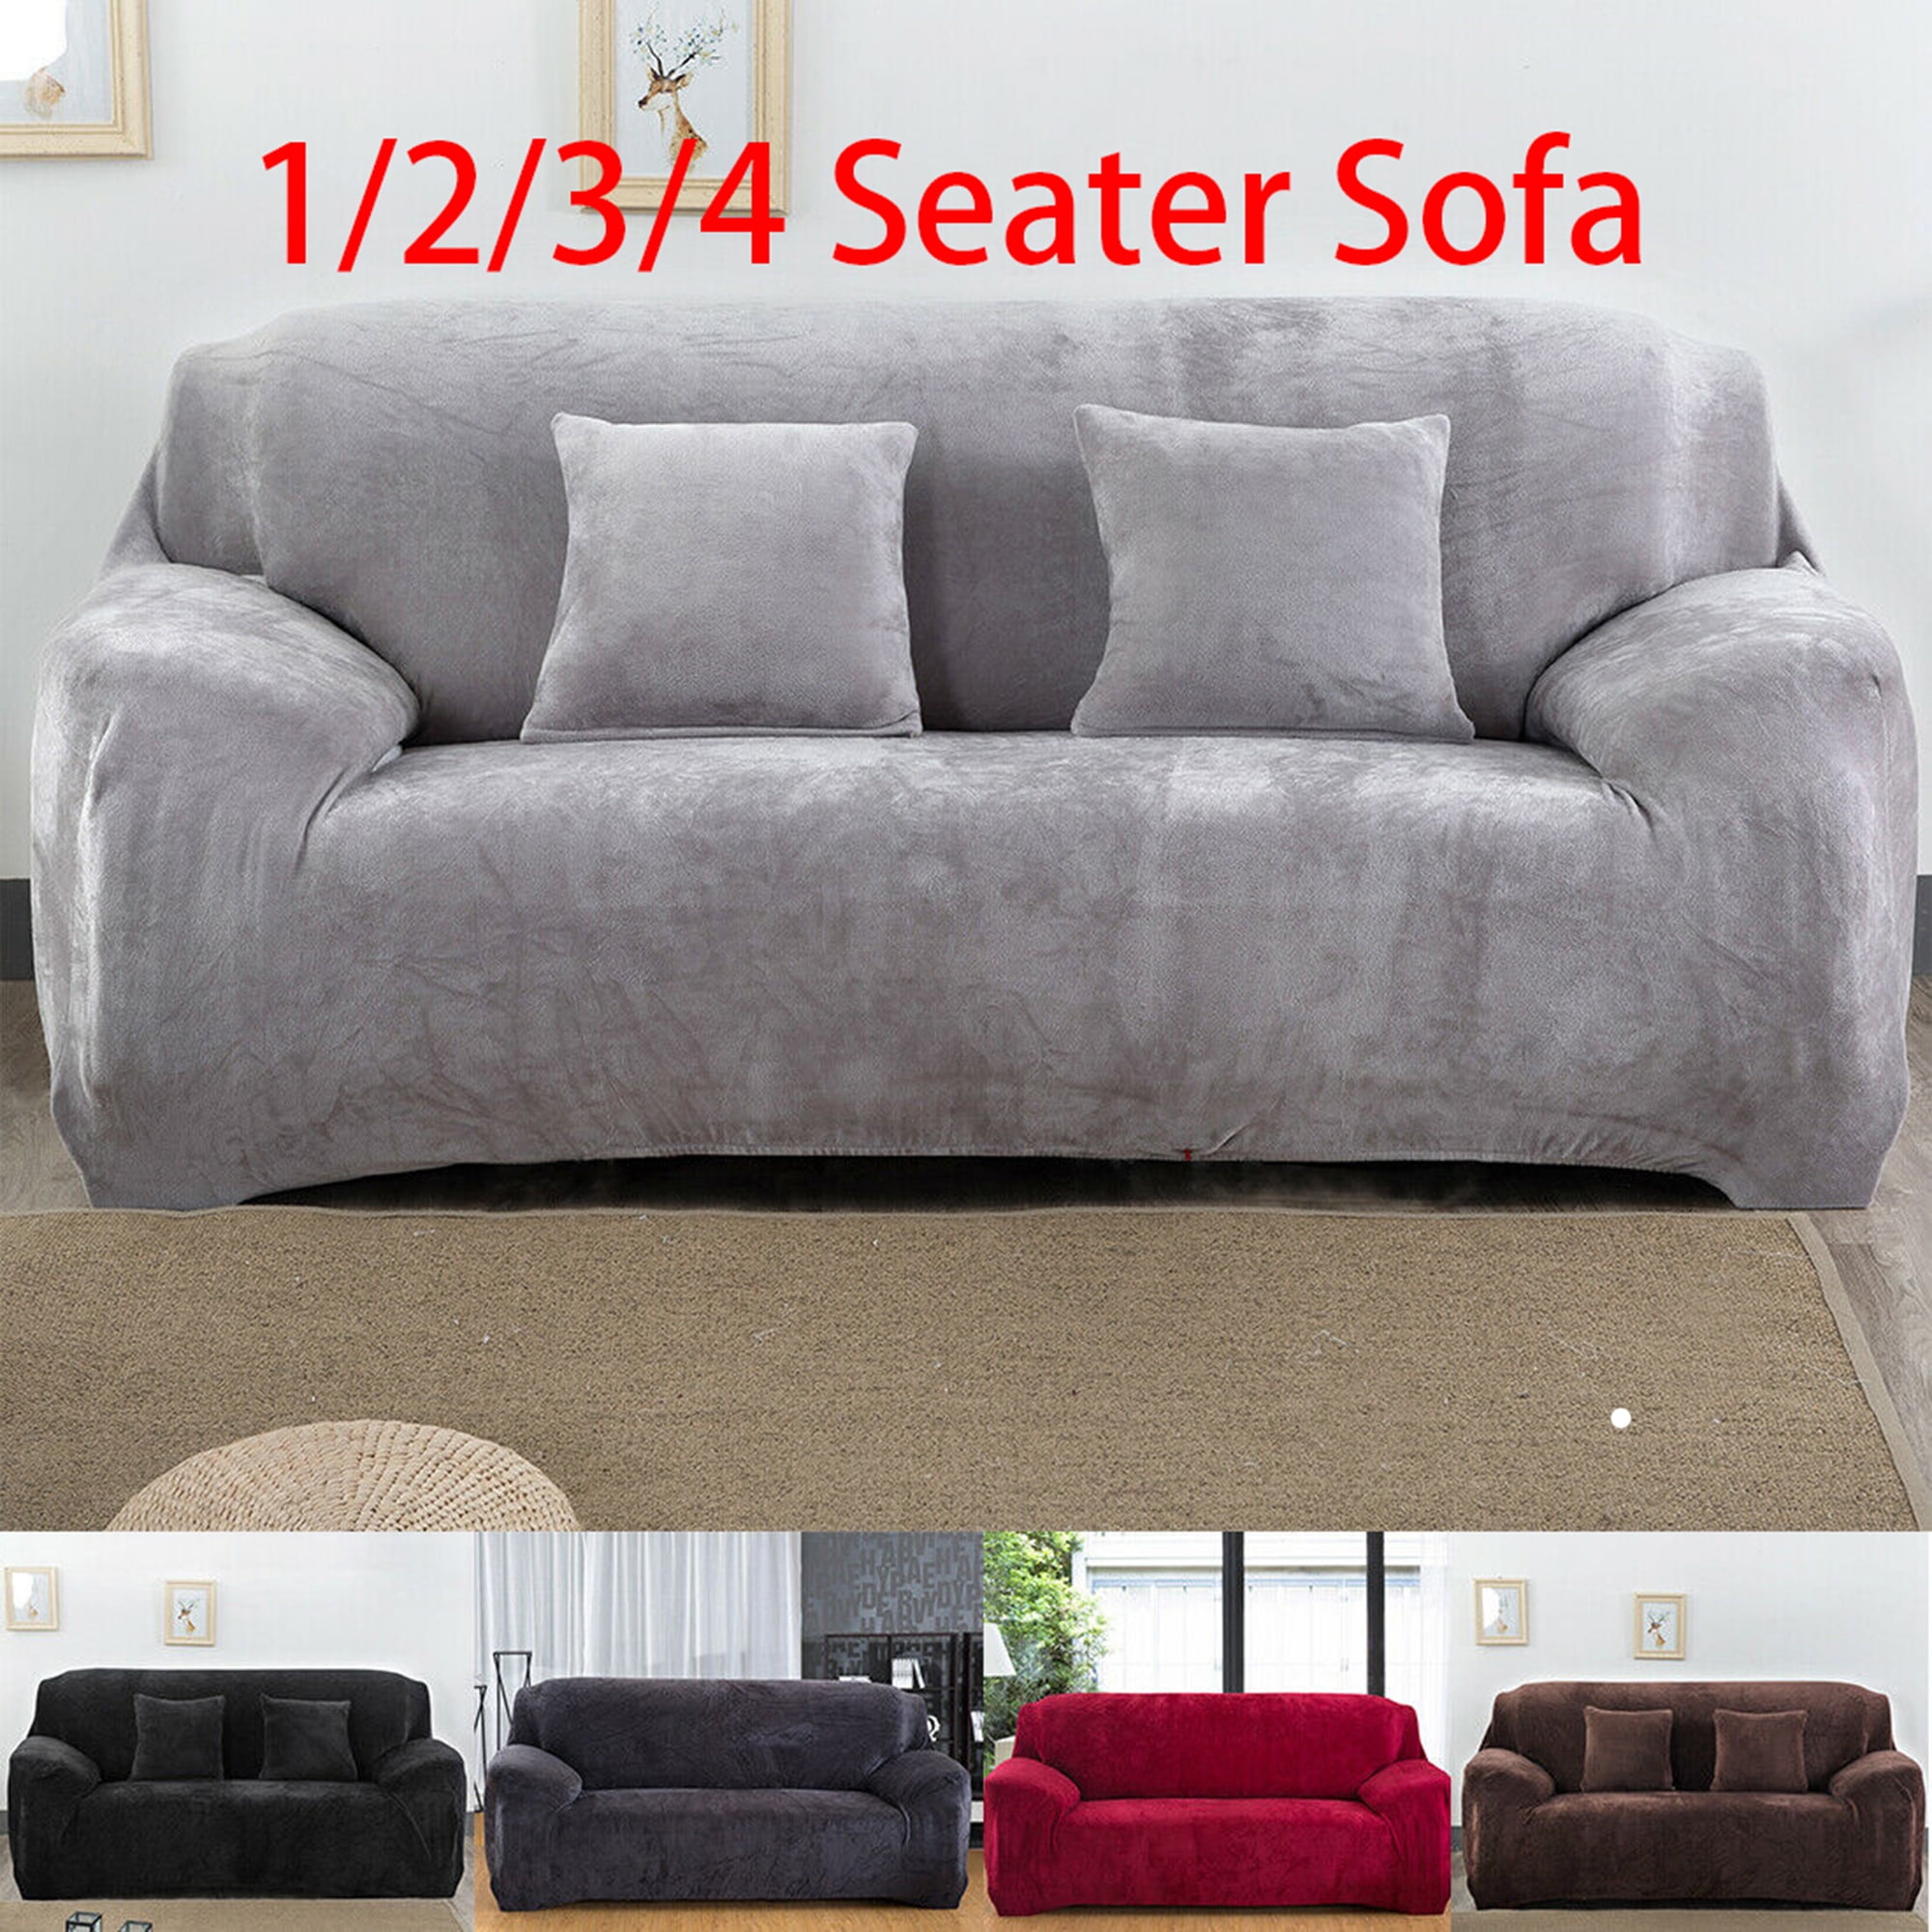 Details about   Stretch Thick Sofa Cover 1 2 3 4 Seater Couch Protector Velvet Plush Slipcover 